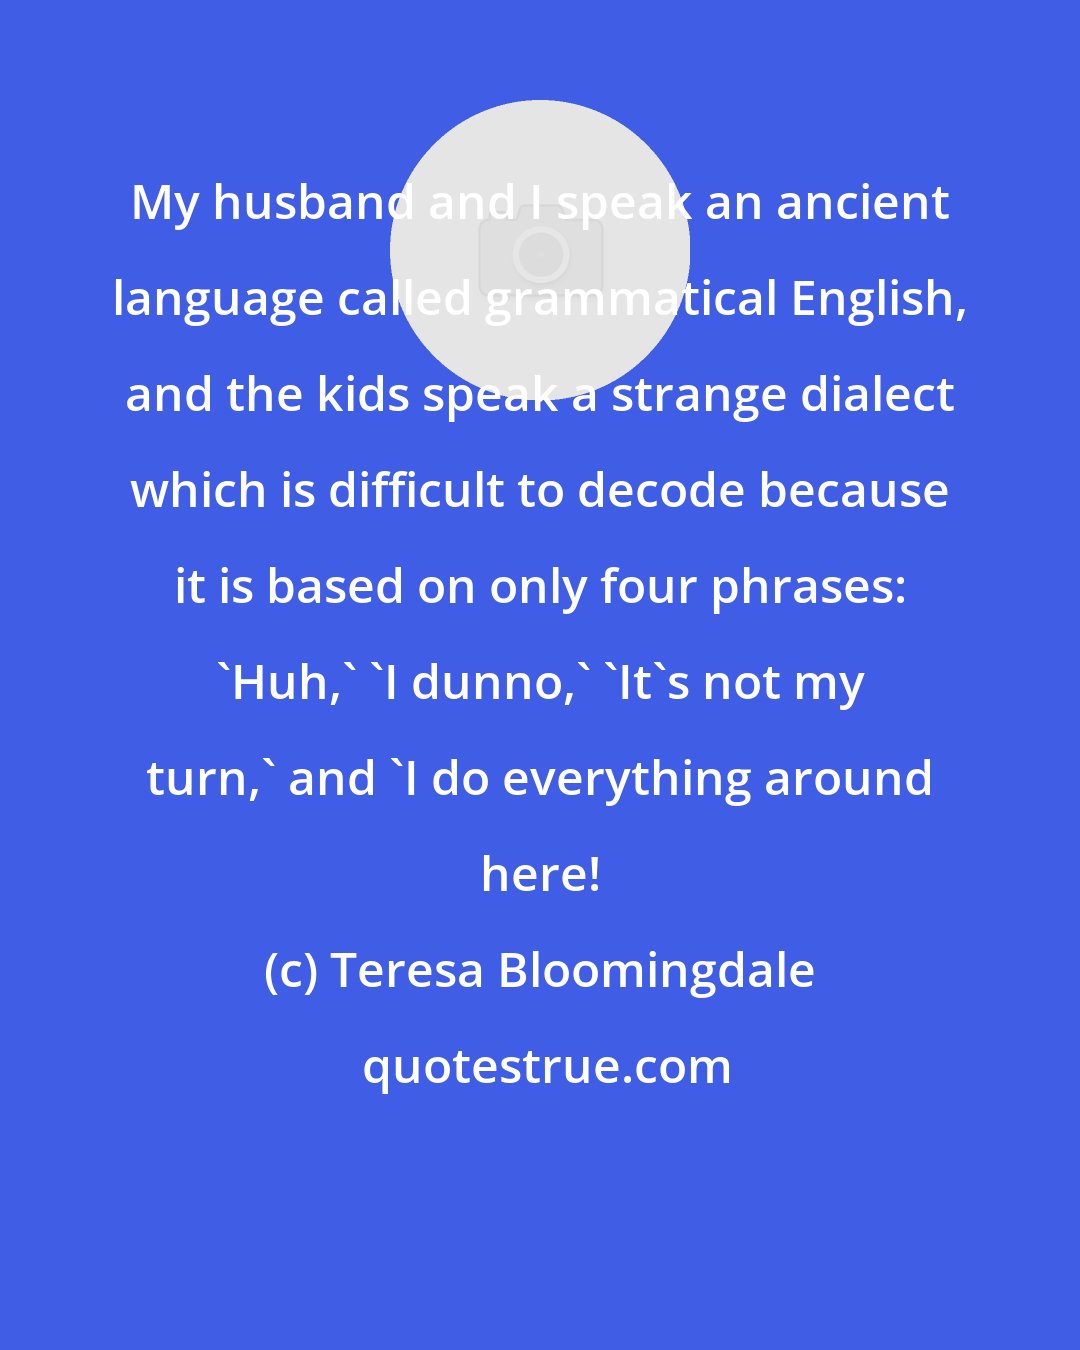 Teresa Bloomingdale: My husband and I speak an ancient language called grammatical English, and the kids speak a strange dialect which is difficult to decode because it is based on only four phrases: 'Huh,' 'I dunno,' 'It's not my turn,' and 'I do everything around here!